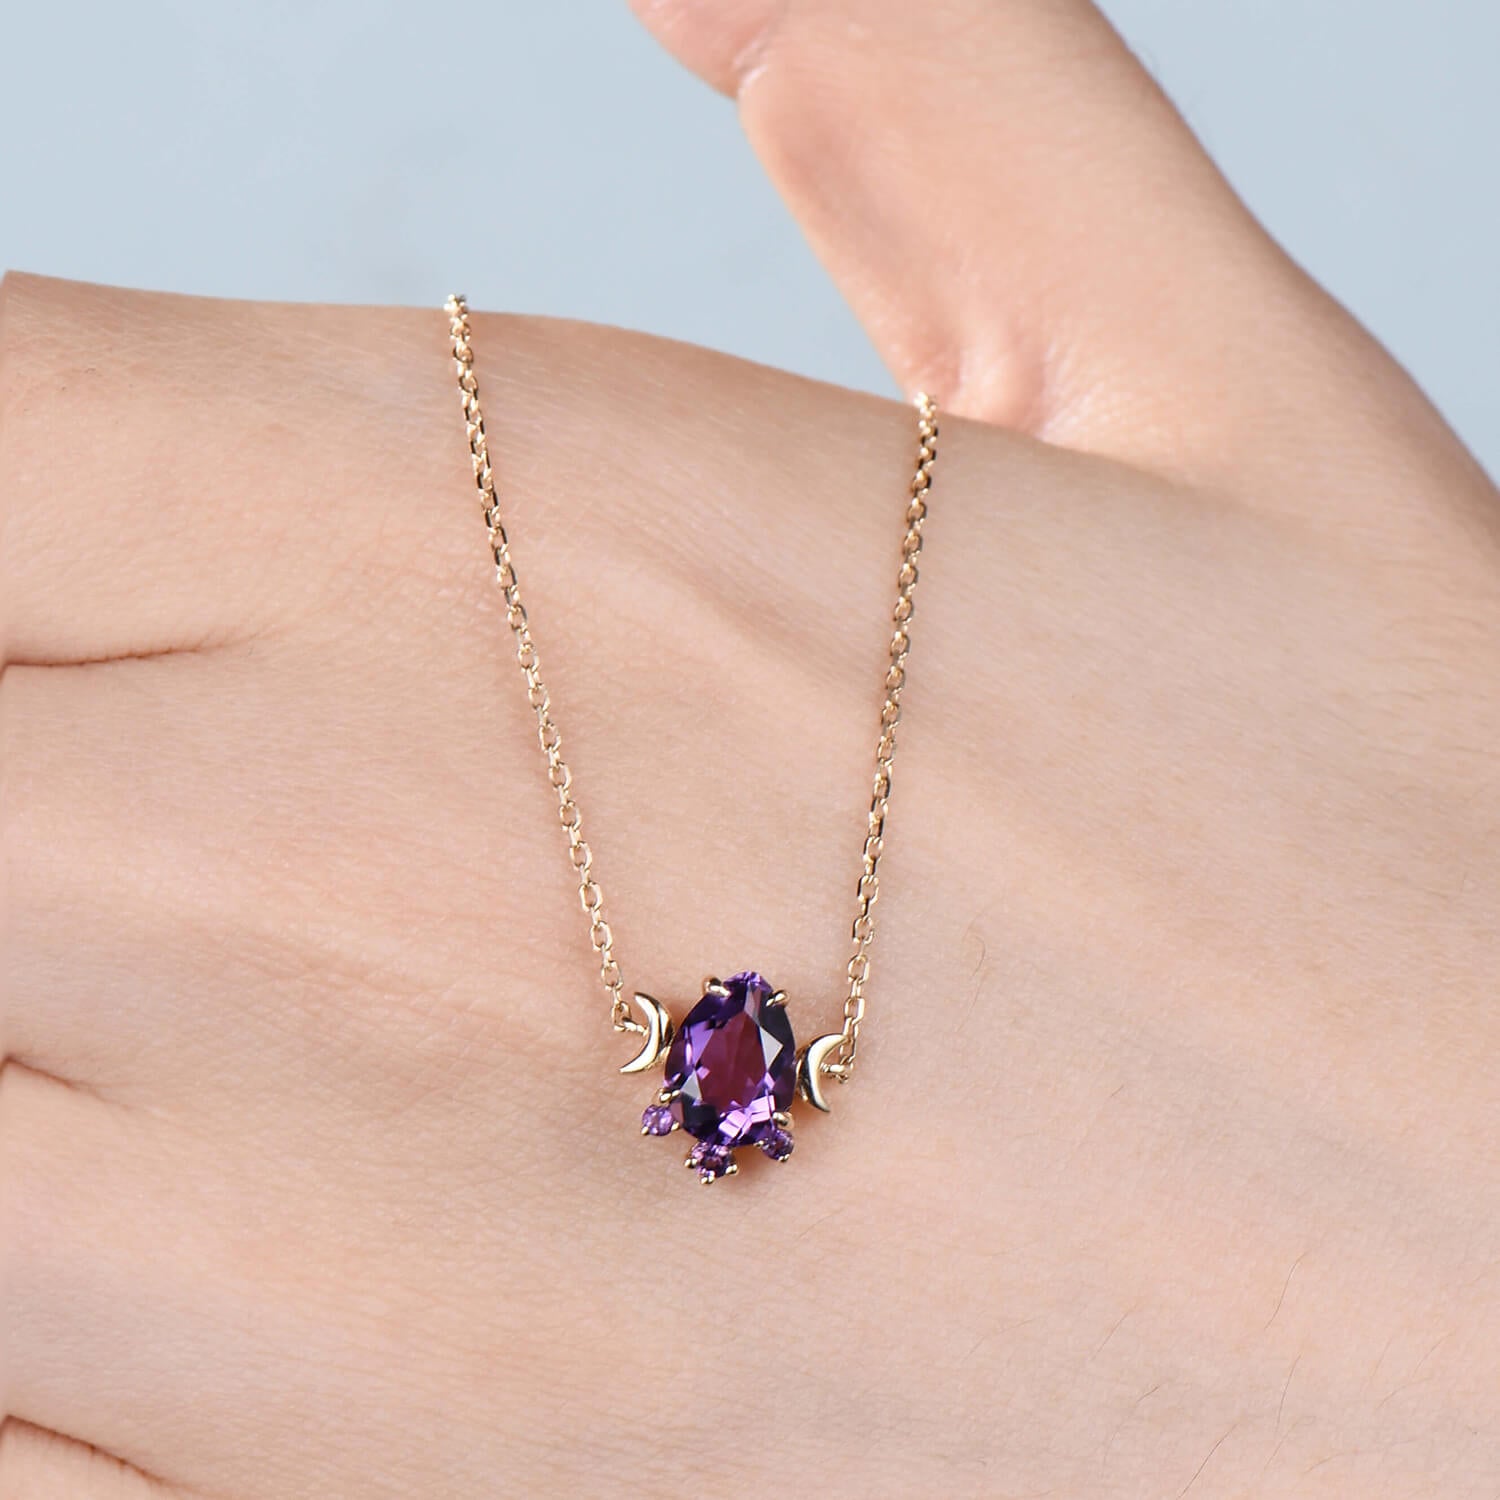 Celina tears light amethyst necklace in rose gold plating in gold plating